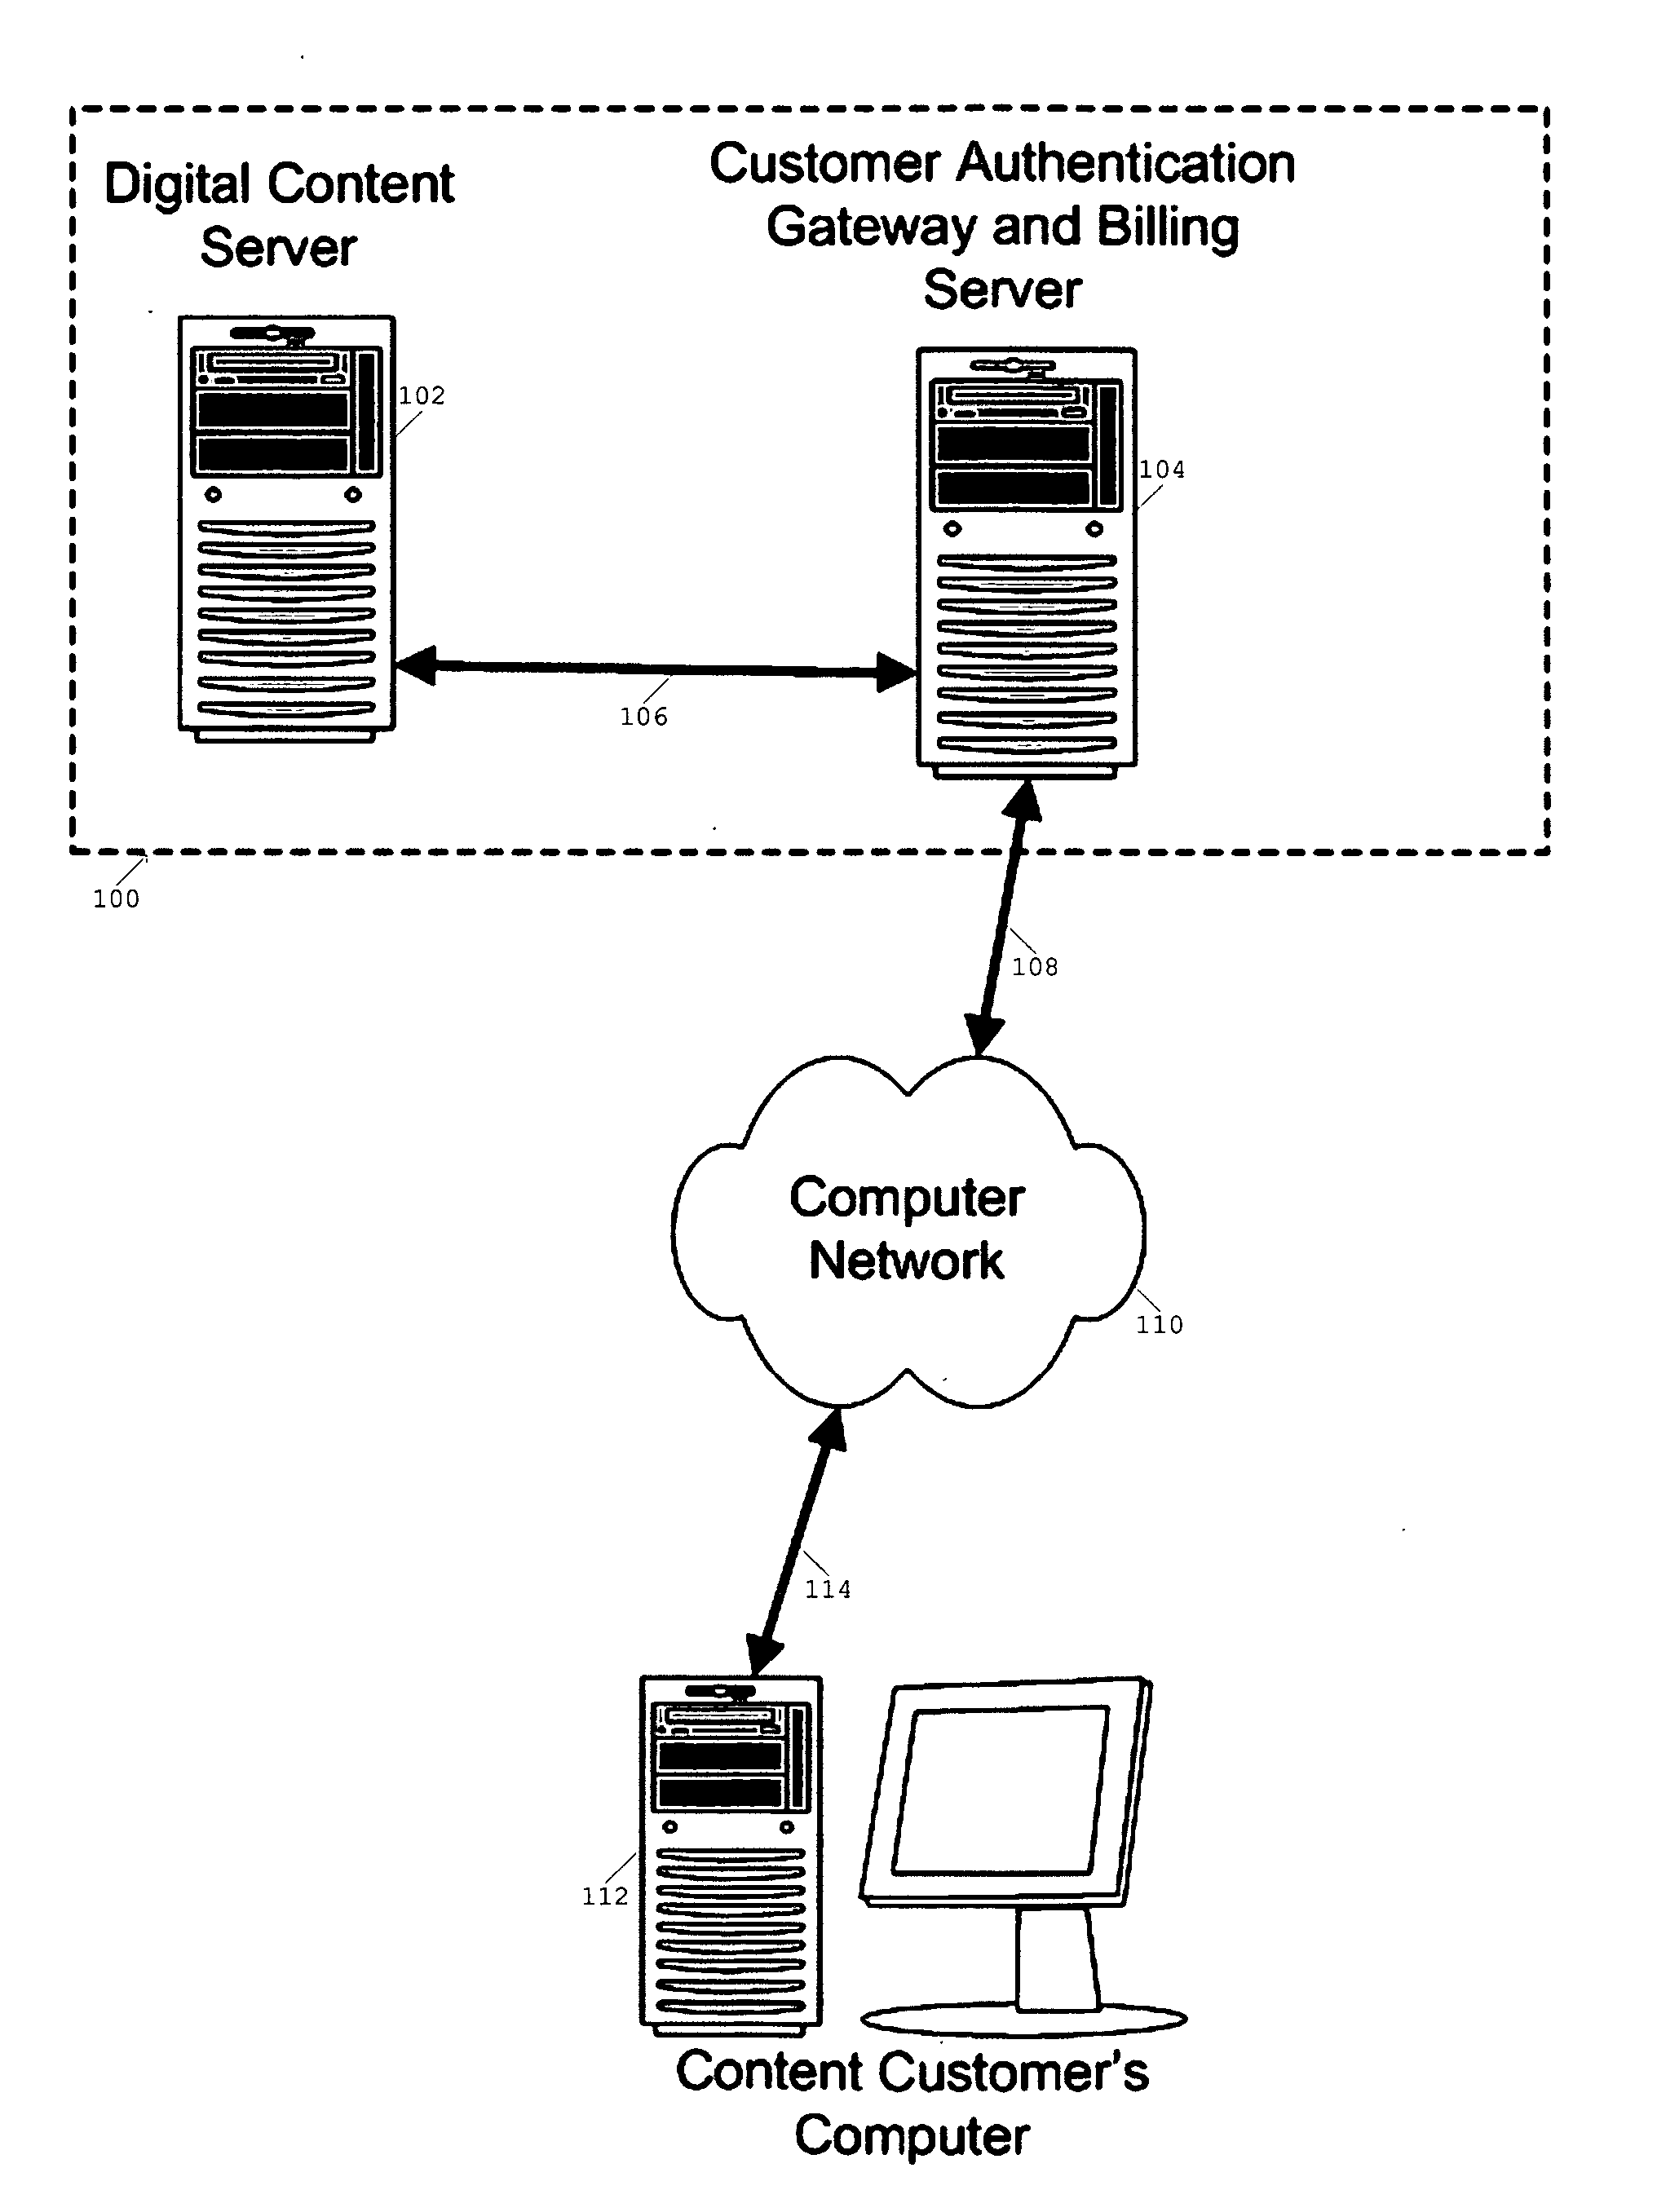 Method and apparatus for the rental or sale, and secure distribution of digital content